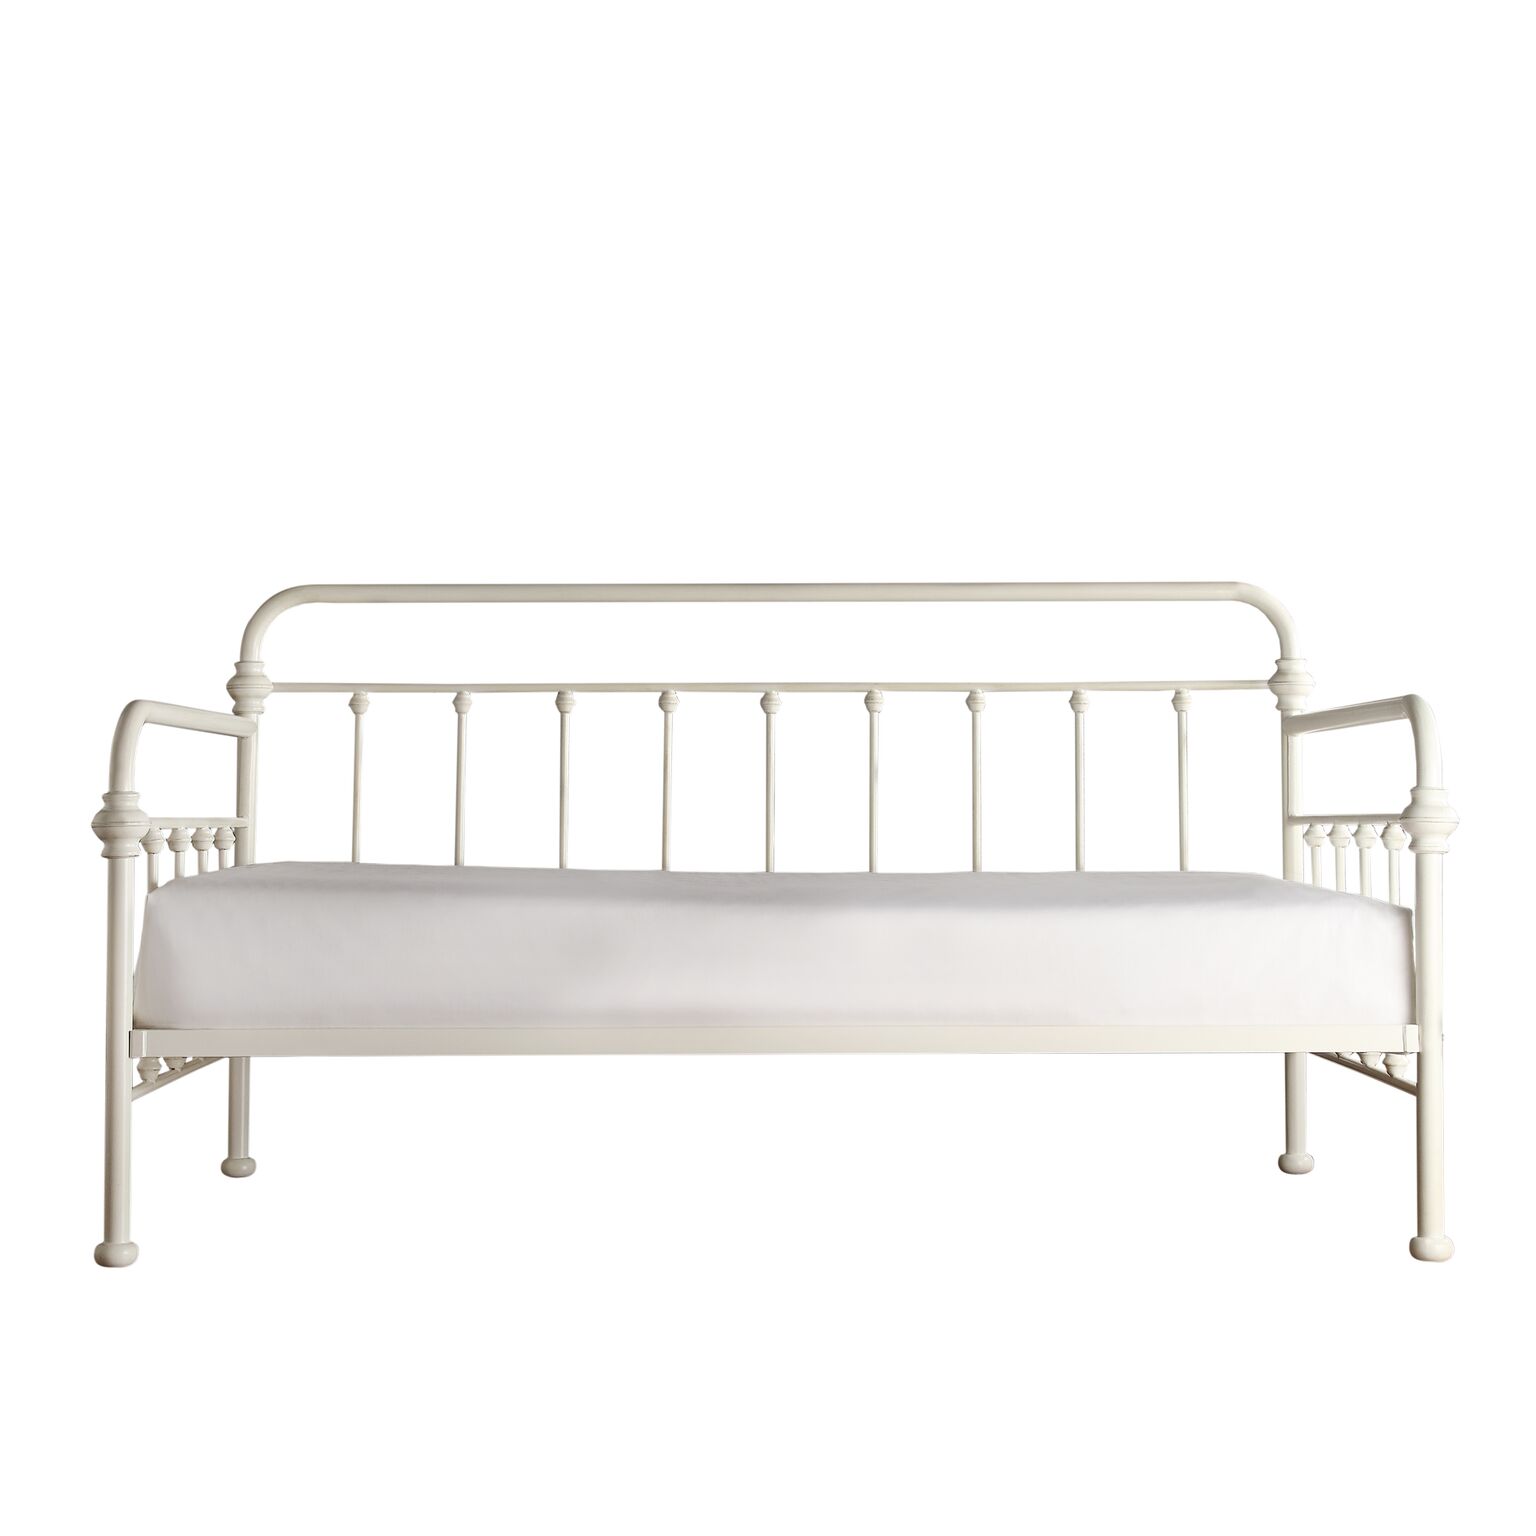 Weston Home Nottingham Metal Twin Daybed, Antique White - image 4 of 7